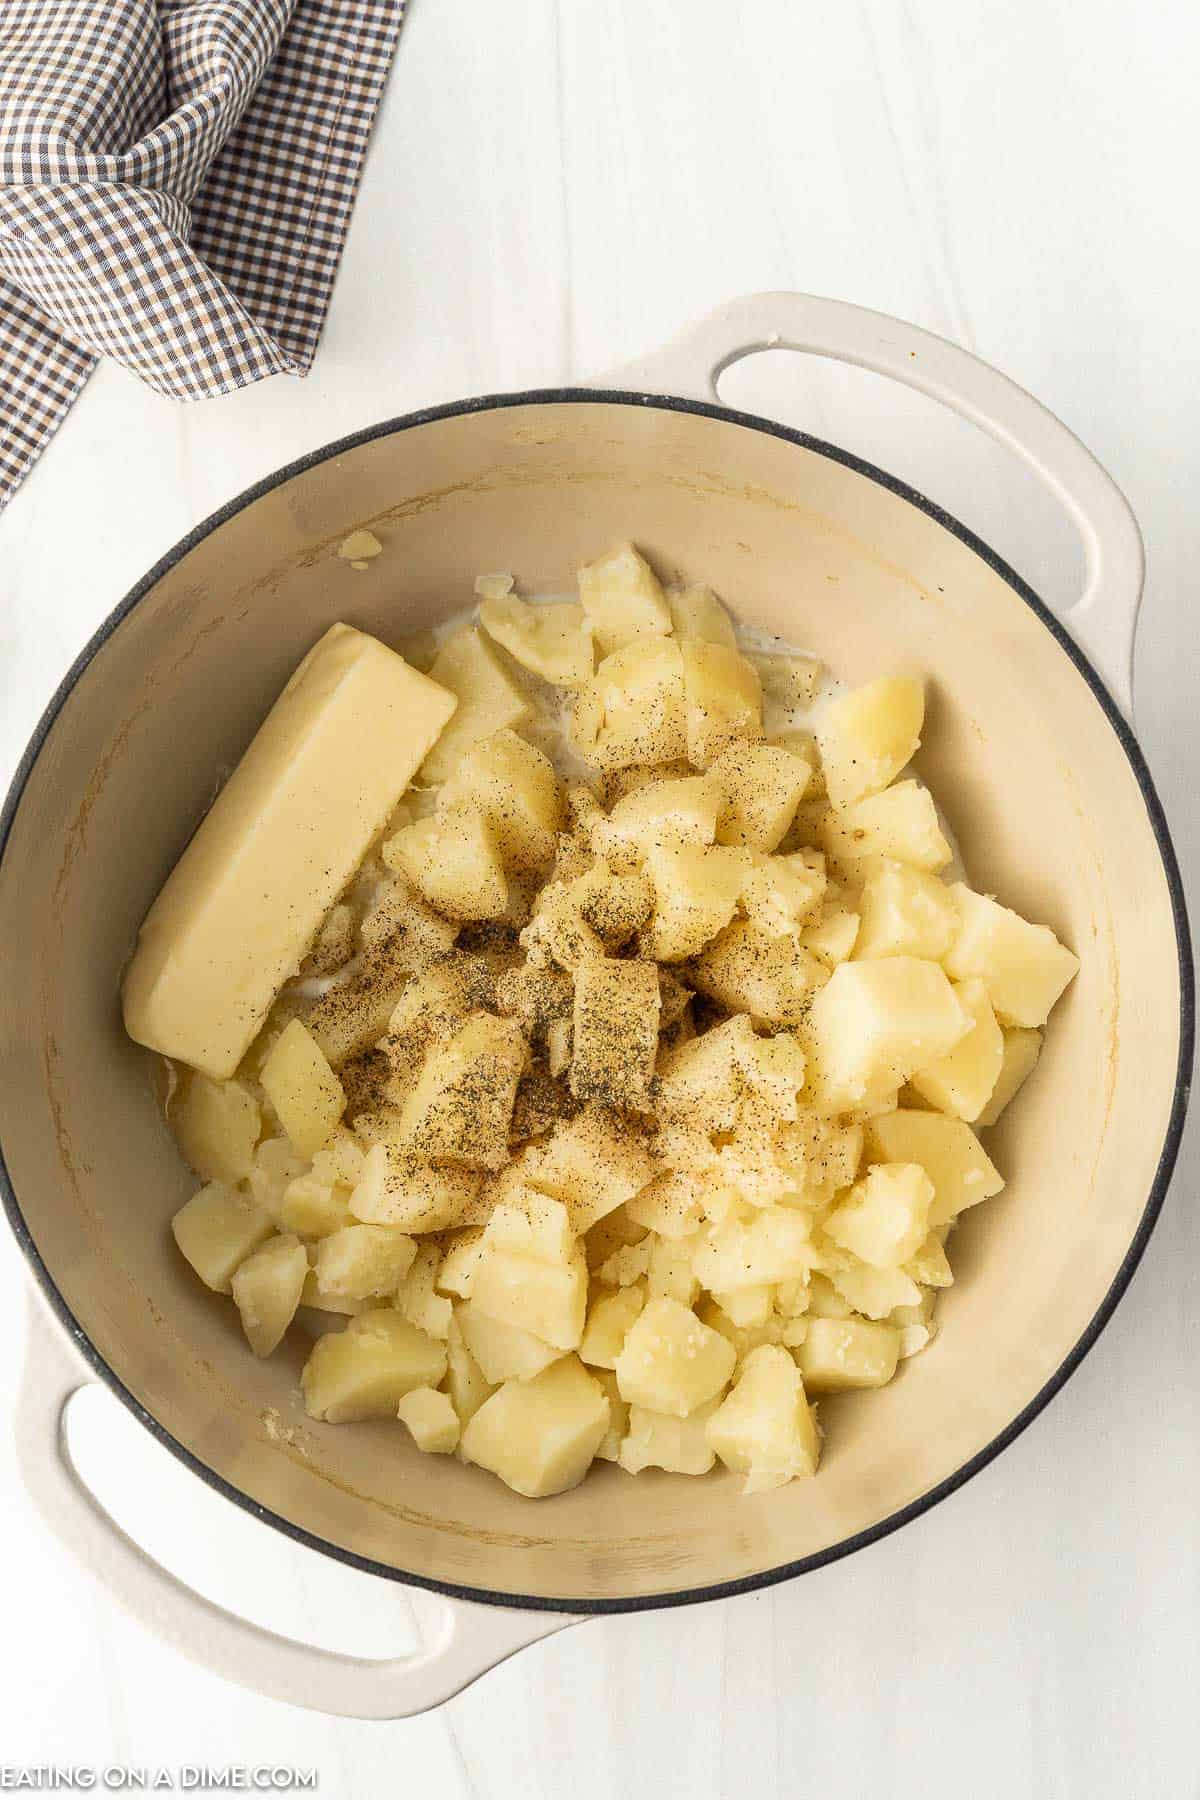 Placed drained cooked diced potatoes in a large pot with a stick of butter and salt and pepper